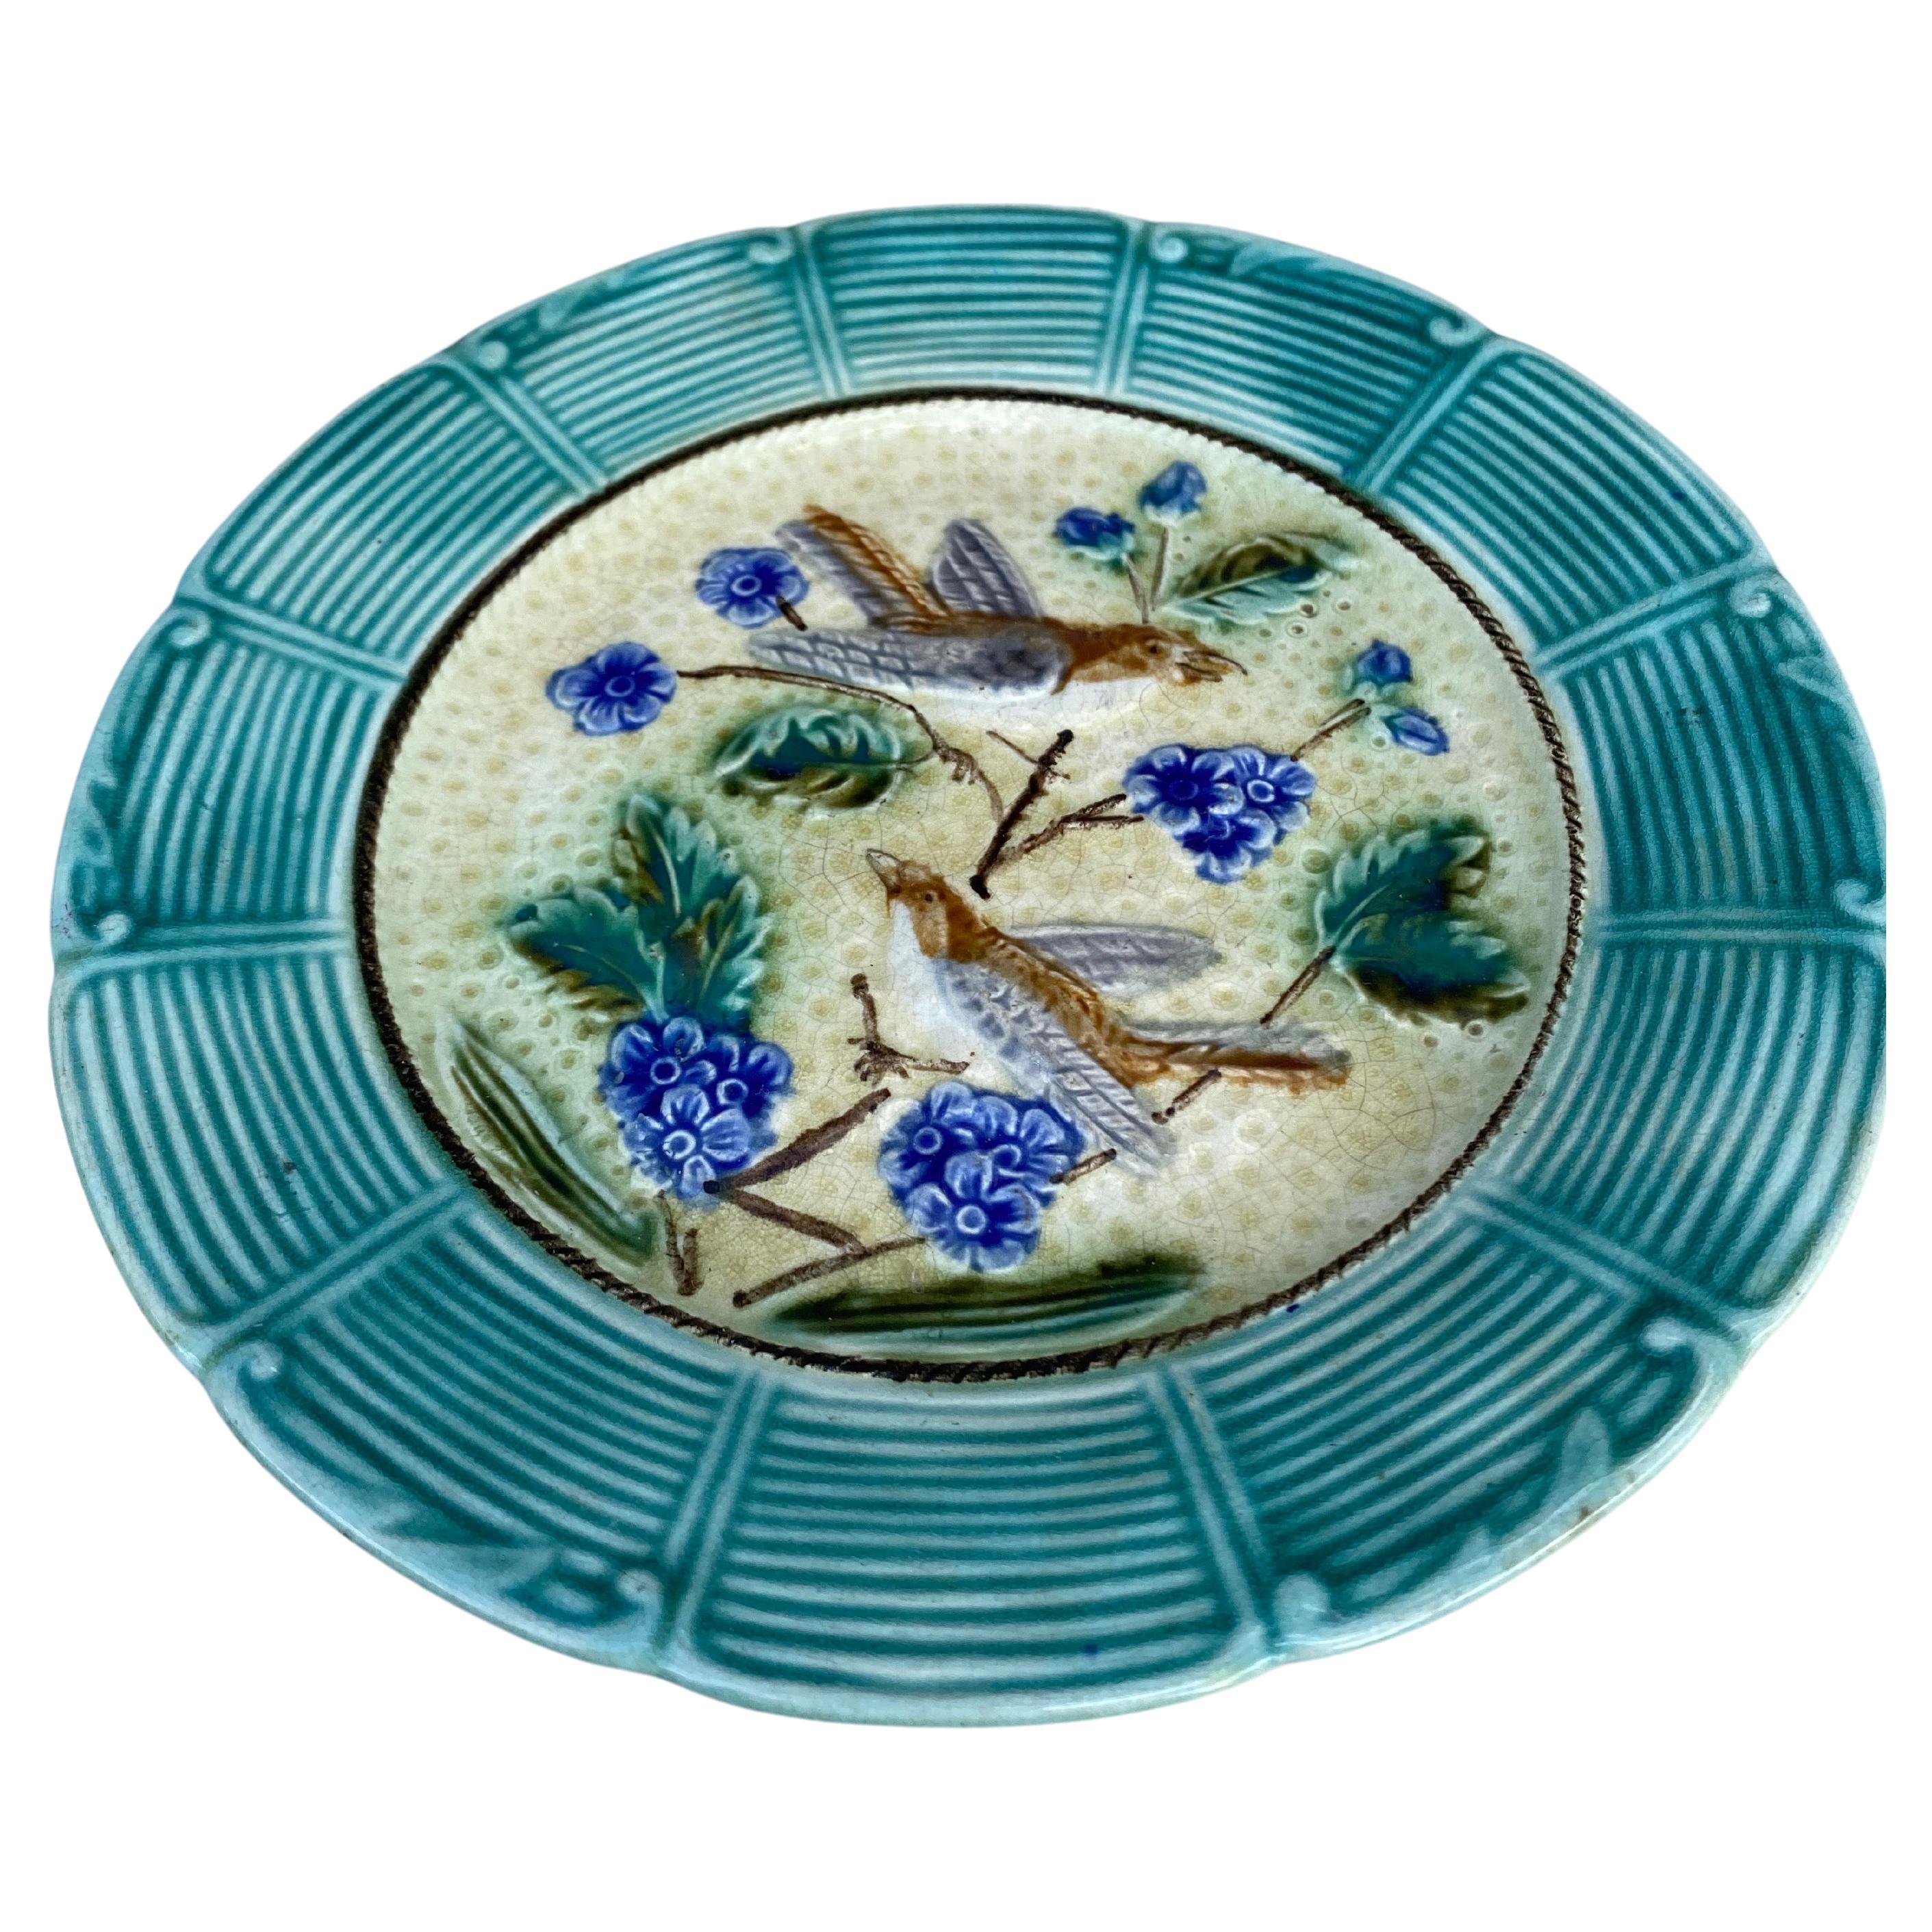 Majolica plate birds with blue flowers Onnaing, circa 1890.